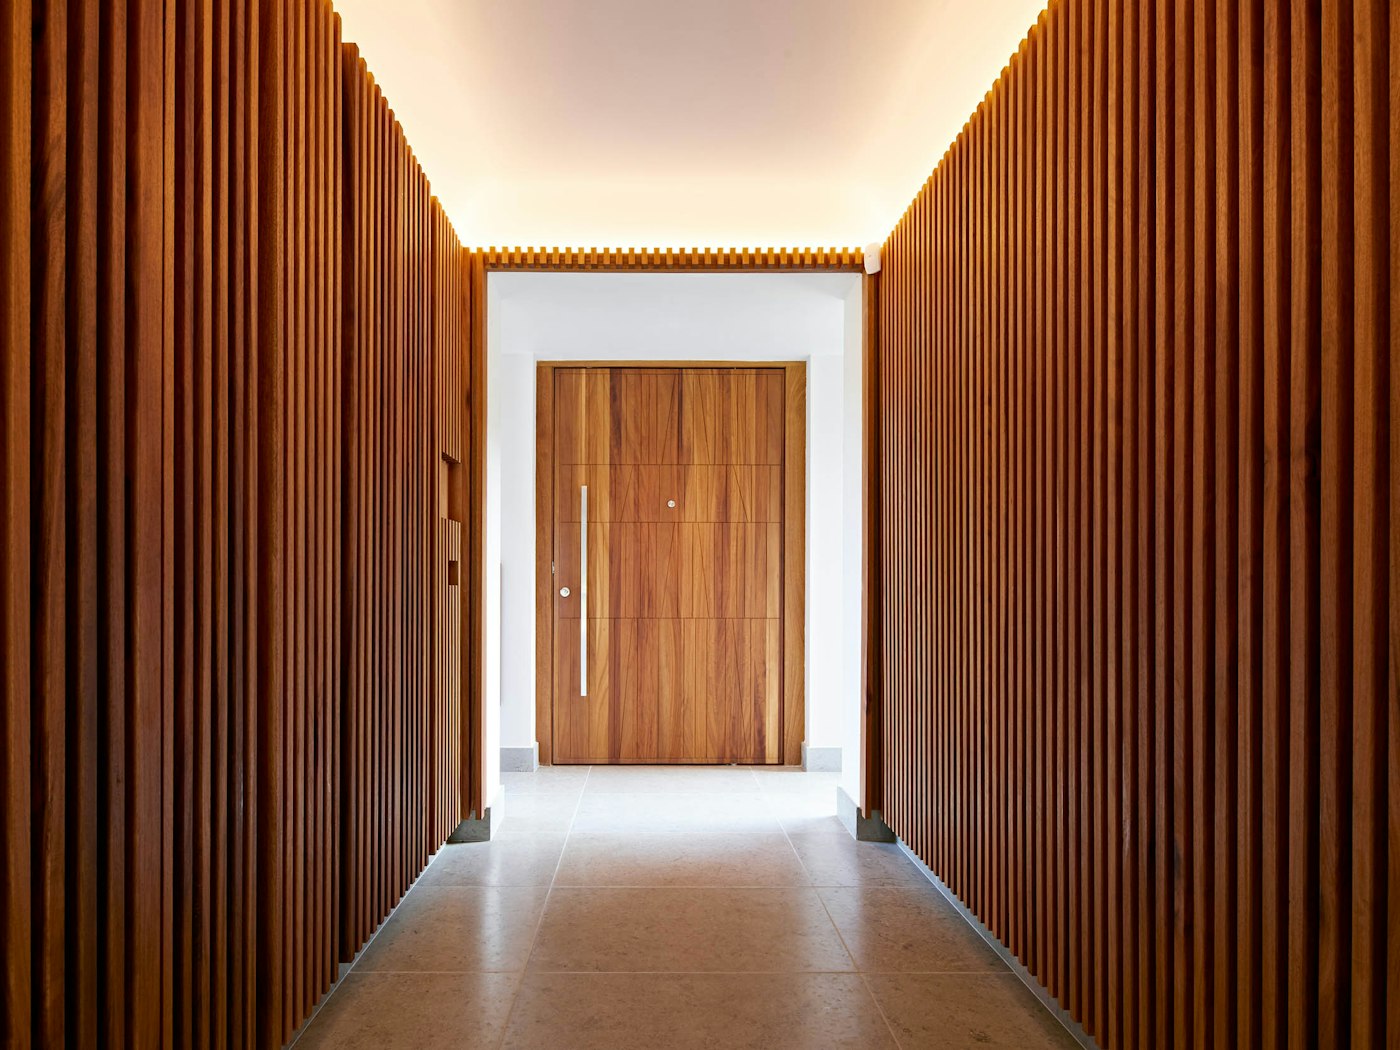 This homeowner chose to match the door to the internal cladding - what an entrance!